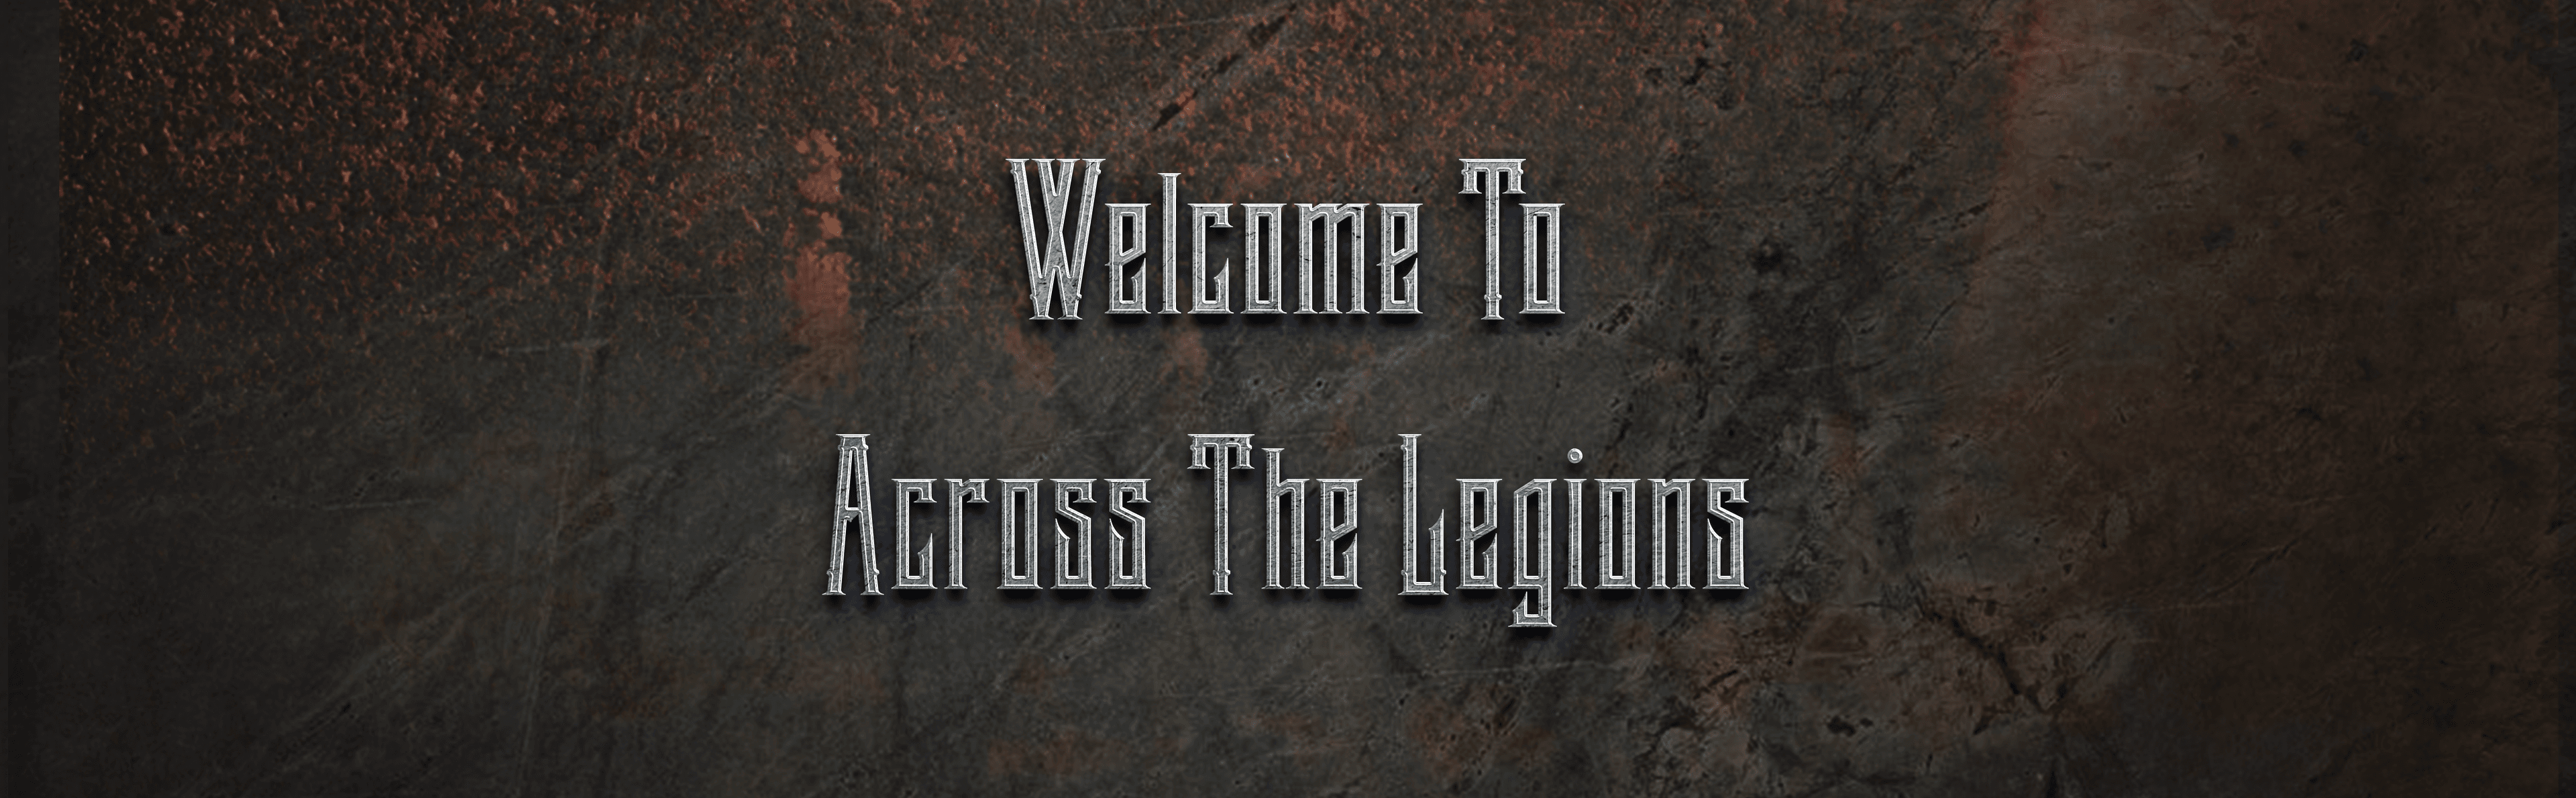 Welcome to Across The Legions!